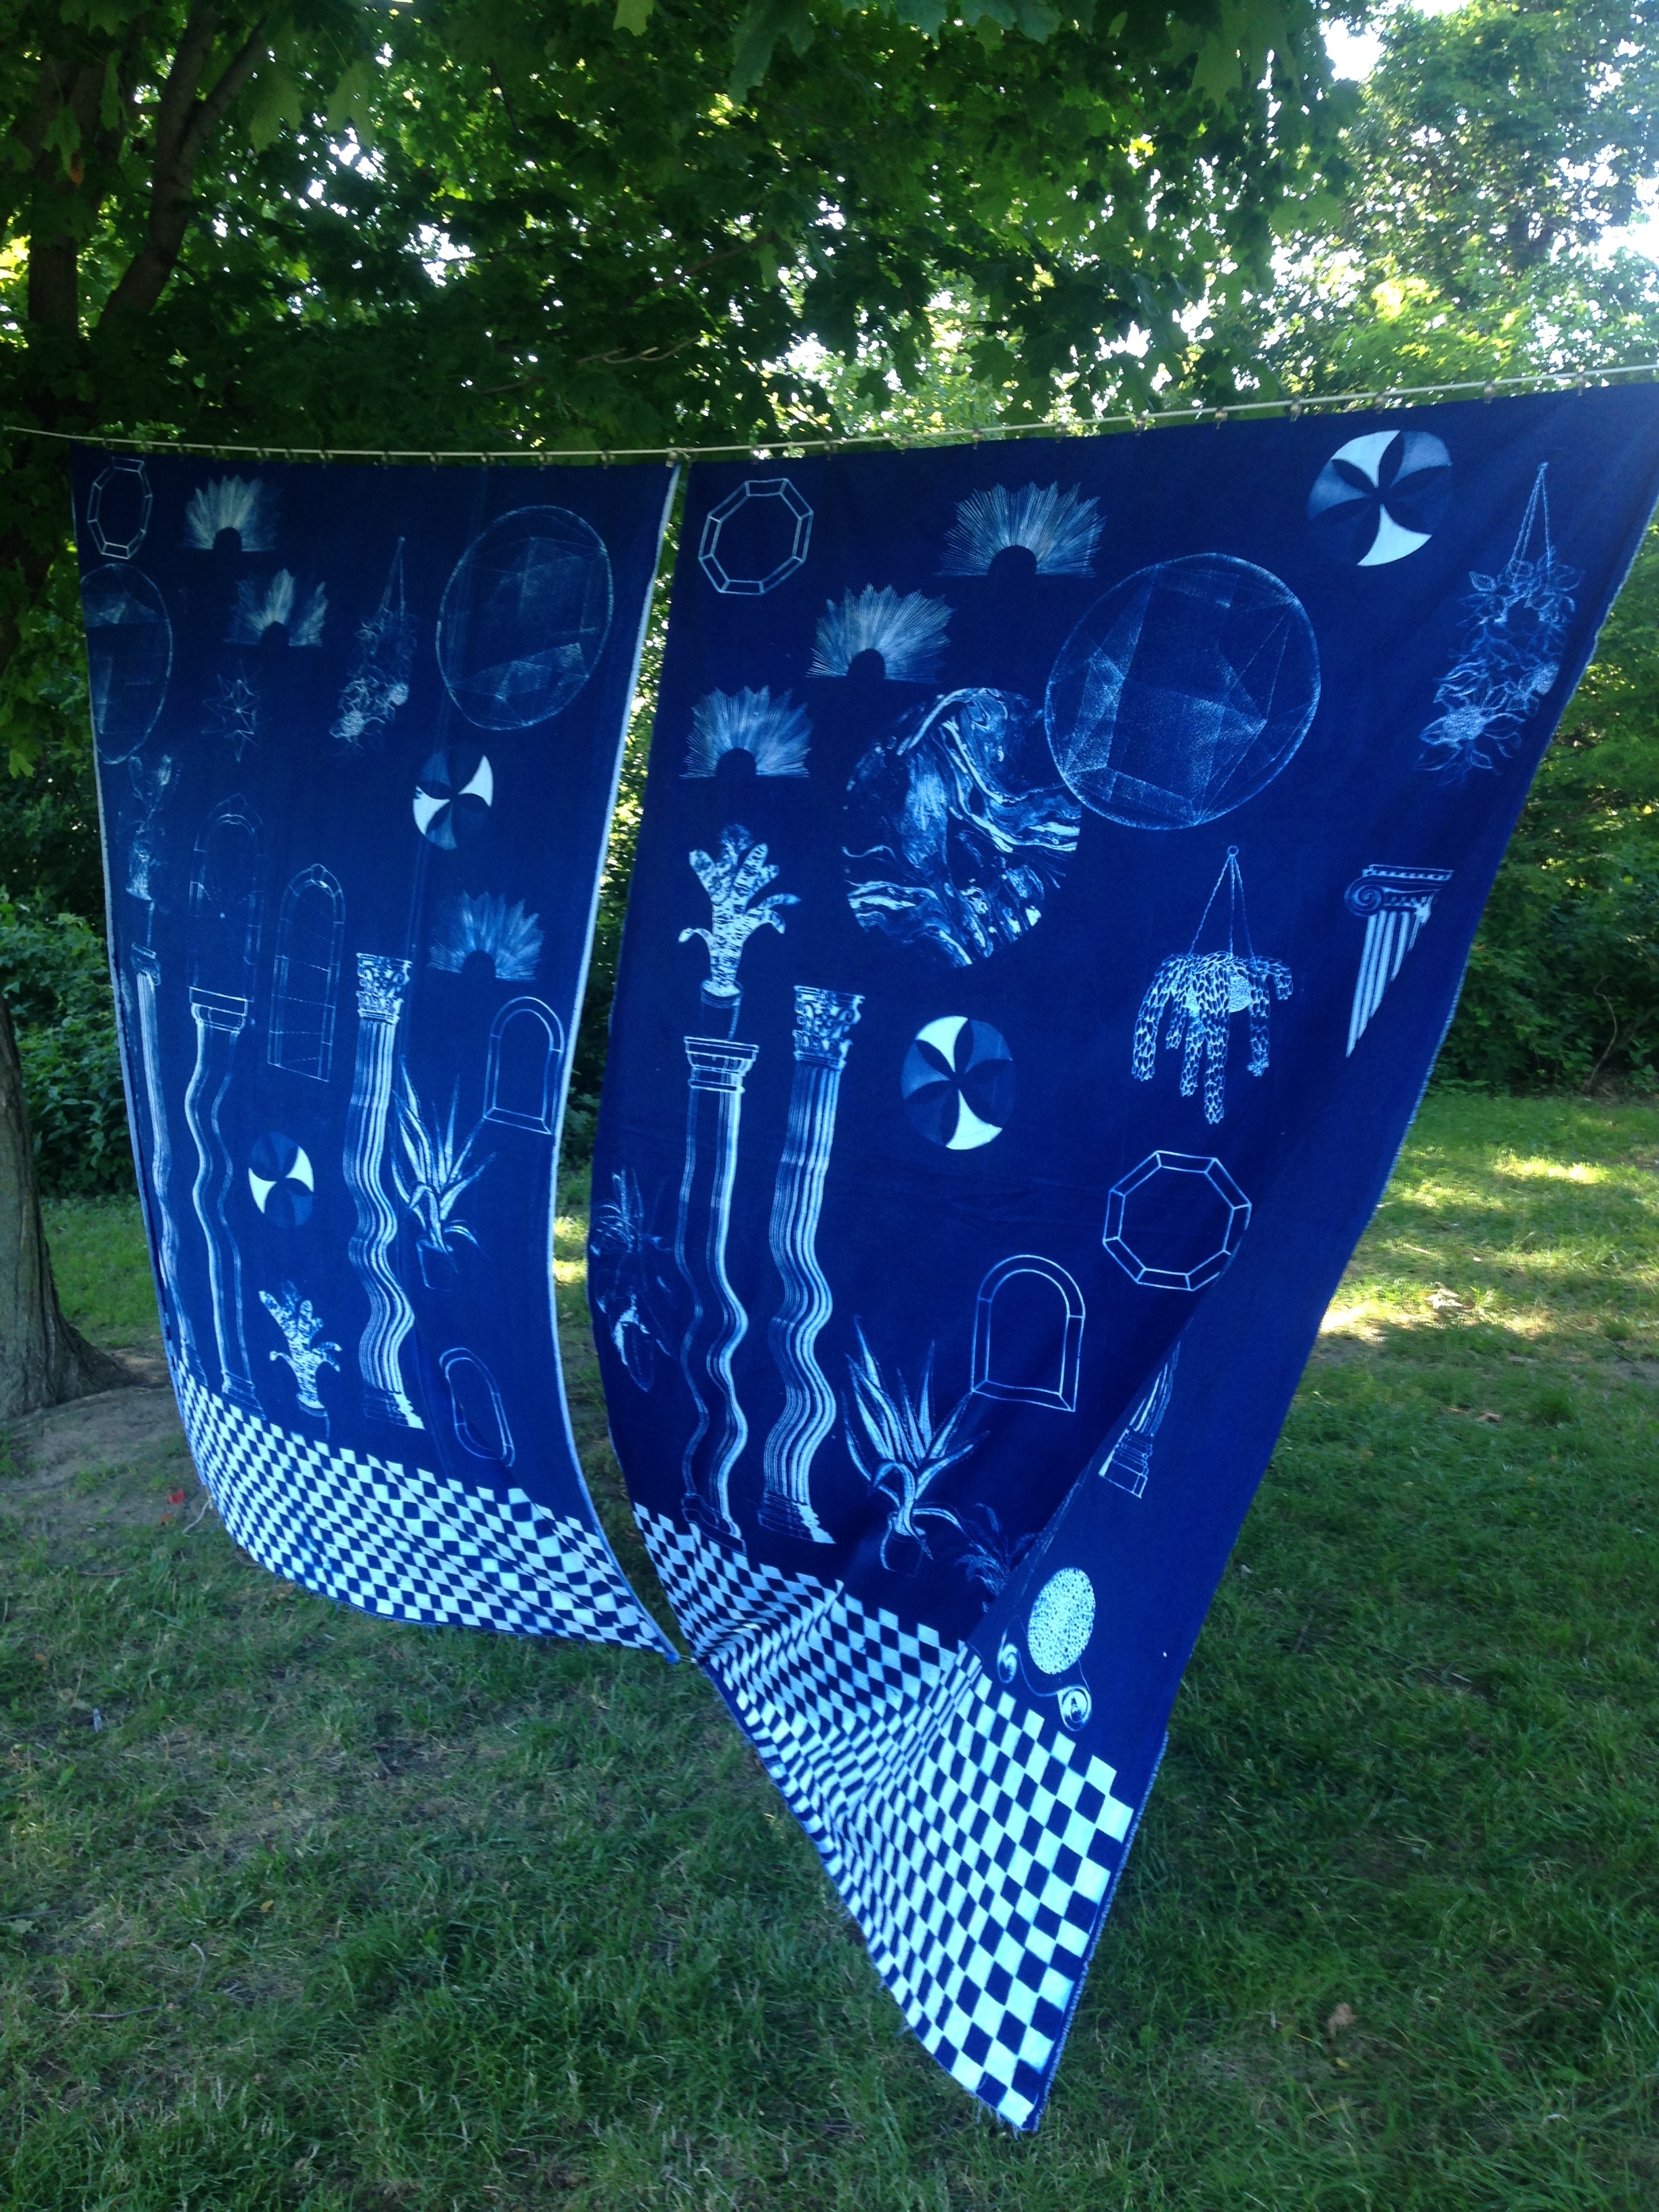  a place halfway between both worlds where anyting can happen and there is no problem with time  Cyanotype sun printed curtains, each 5' x 7'  Feast in the East, Praire Drive park, Scarborough&nbsp;  2017 